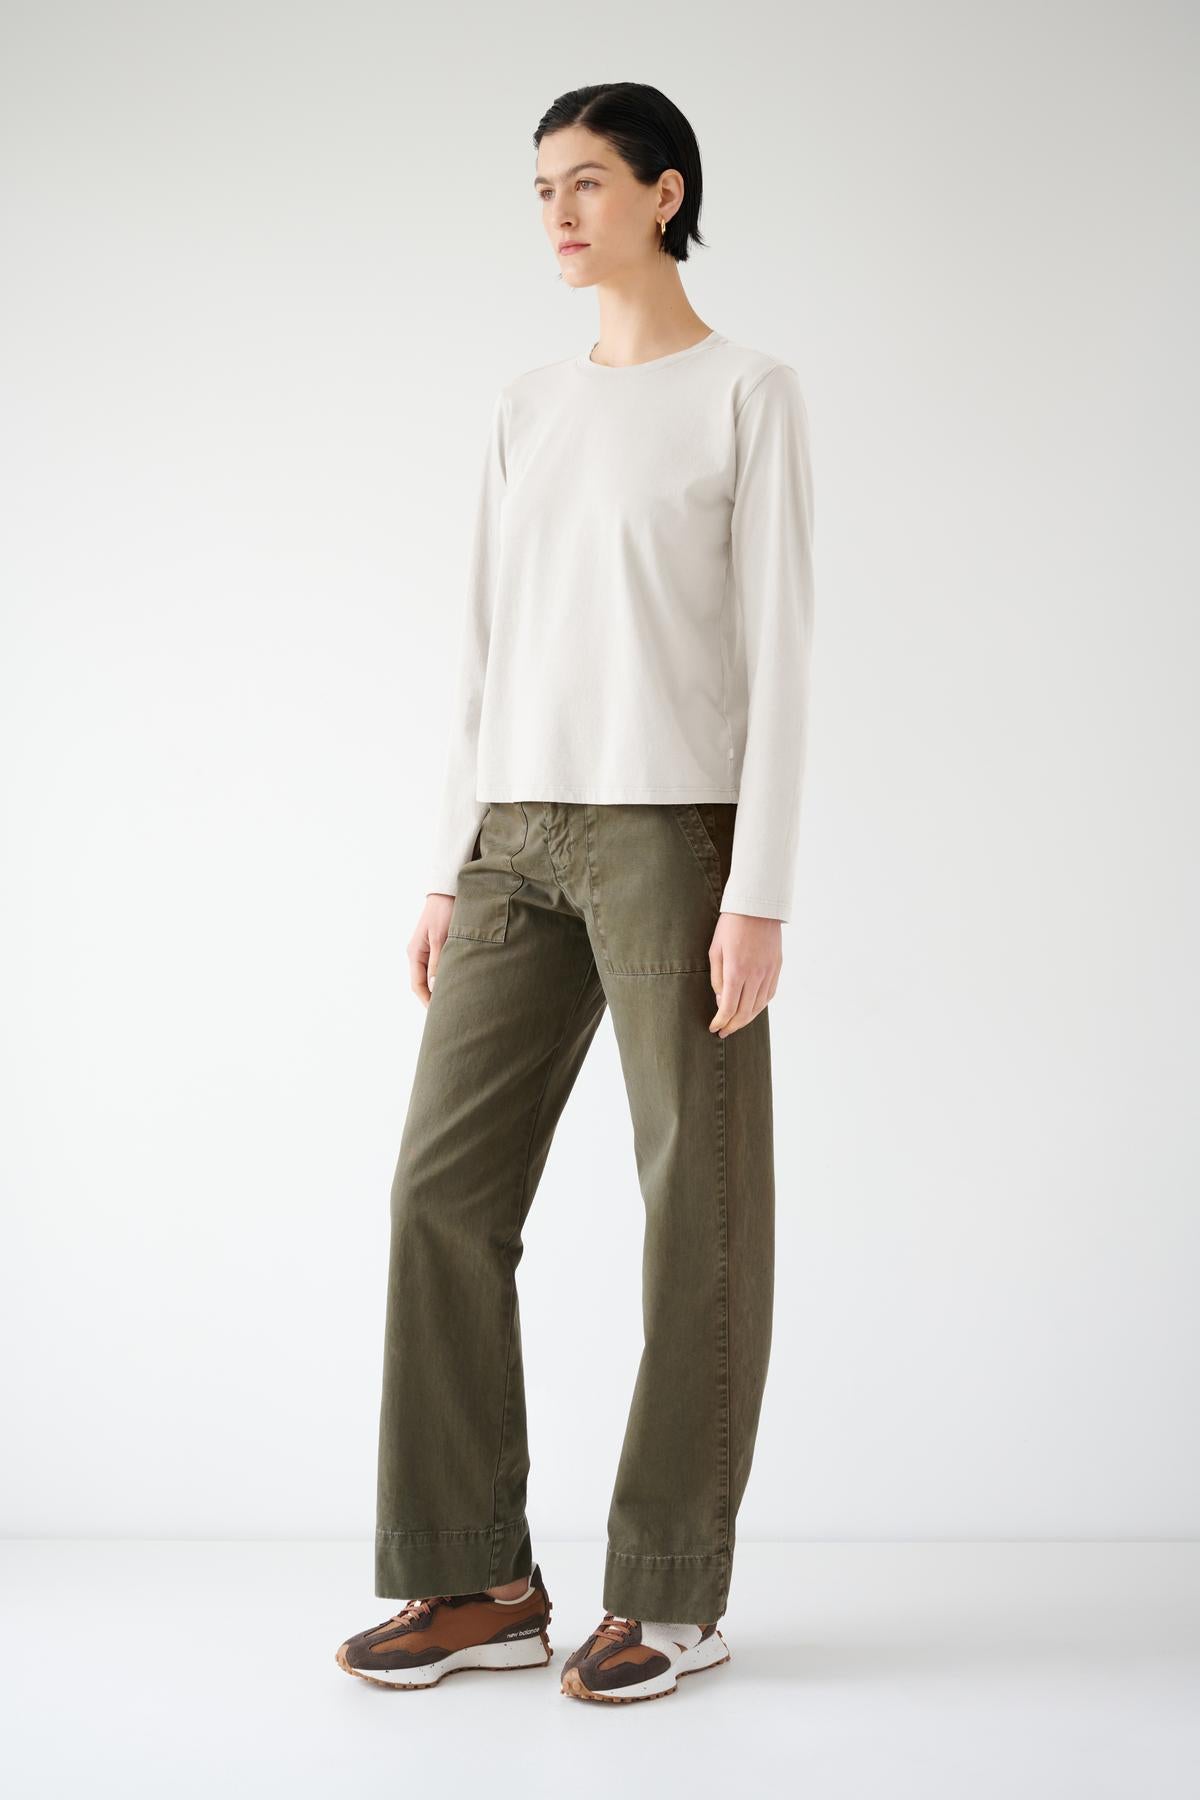   The model is wearing a relaxed fit VICENTE TEE shirt and olive pants made from organic cotton. (Brand: Velvet by Jenny Graham) 